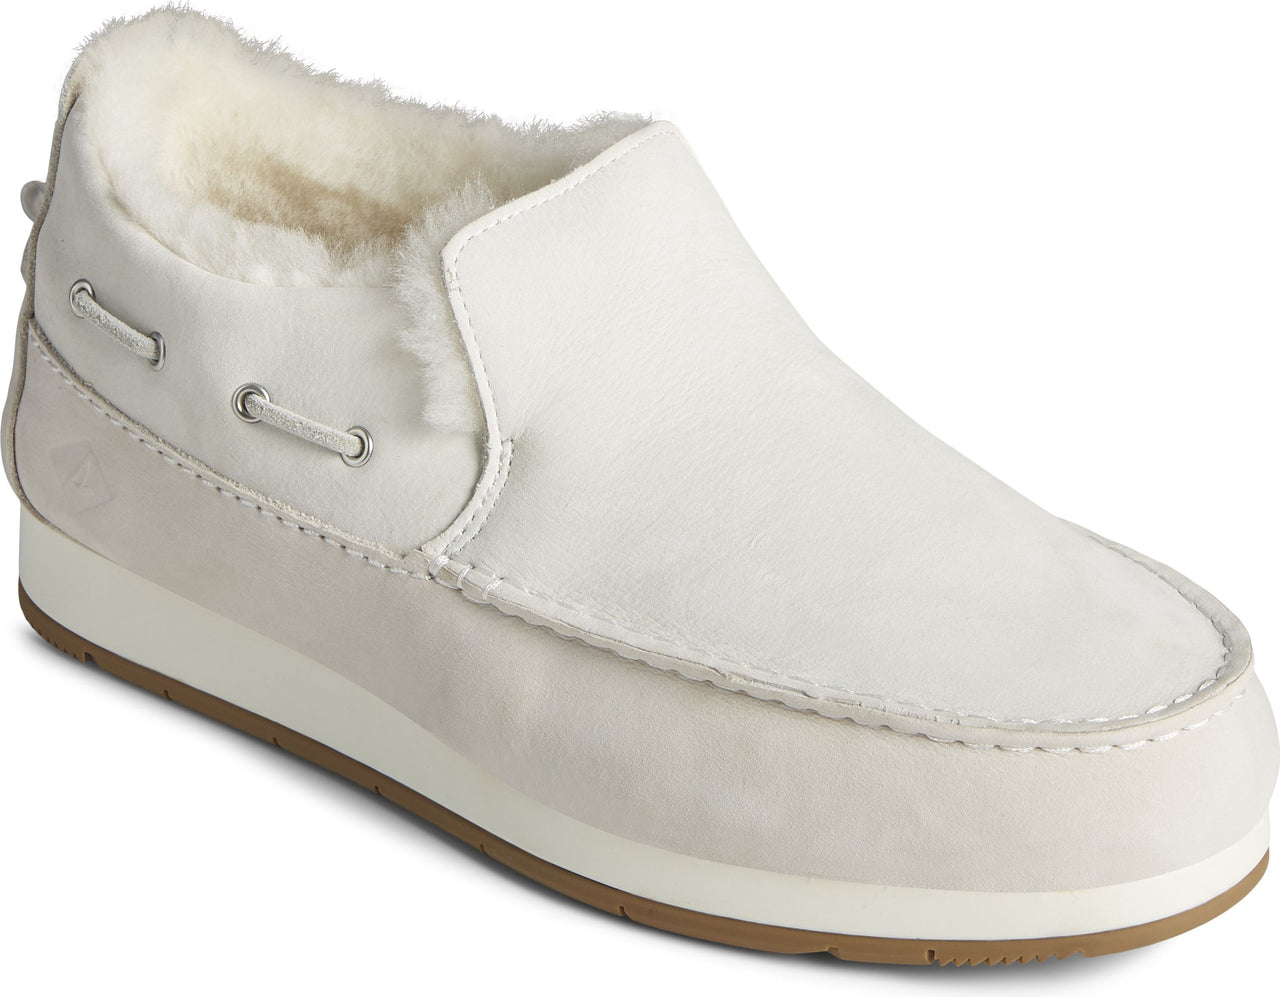 Sperry Shoes Moc-sider Premium Ivory